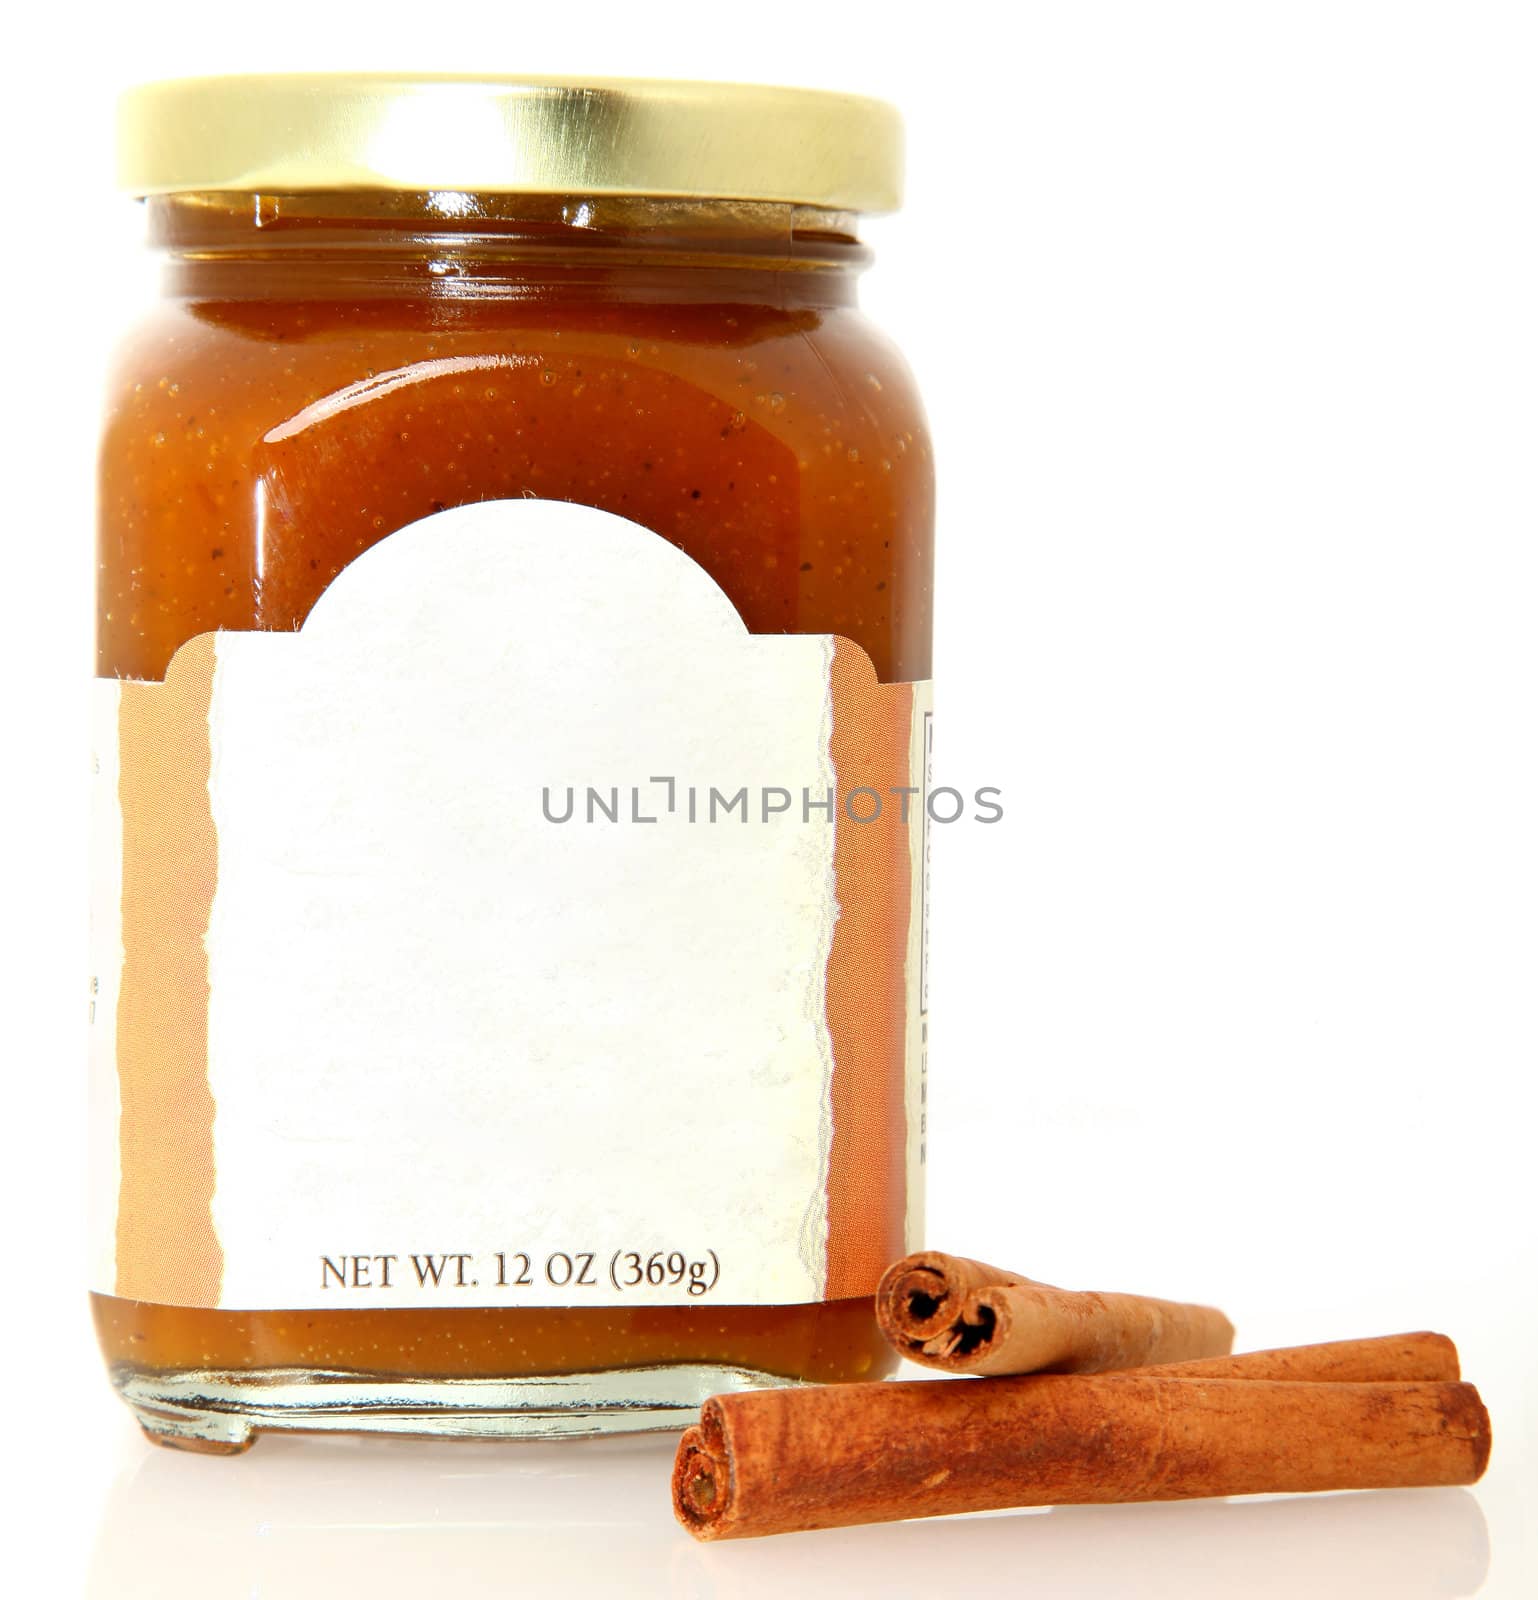 Pumpkin spice butter in jar with cinnamon sticks over white.  Blank label for text.